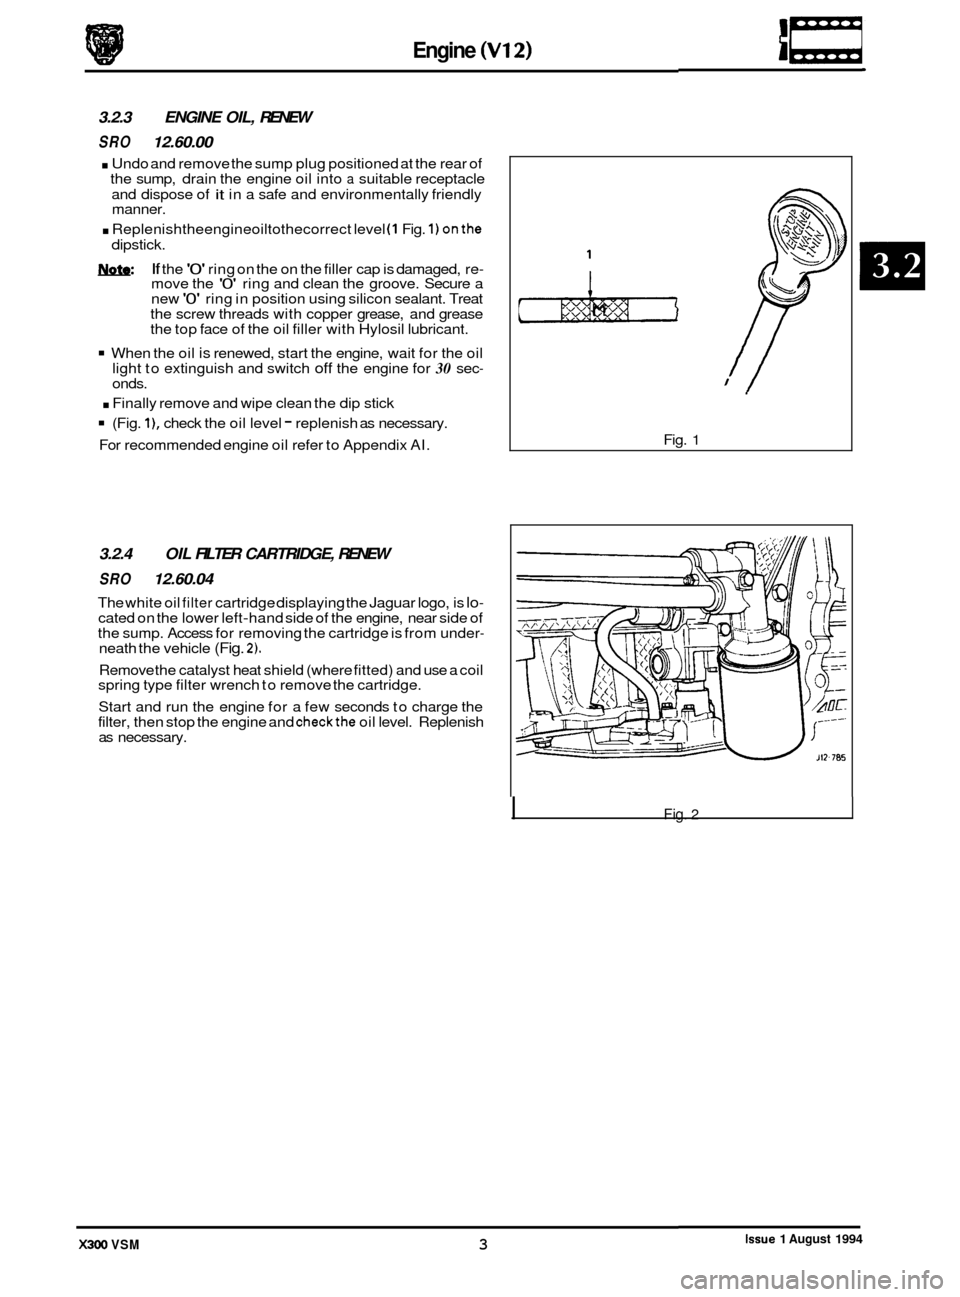 JAGUAR XJ6 1994 2.G Workshop Manual Engine (V12) 
3.2.3 ENGINE OIL, RENEW 
SRO 12.60.00 
. Undo  and remove the sump  plug positioned  at the  rear  of 
the  sump,  drain the  engine oil into a suitable  receptacle 
and  dispose  of 
it